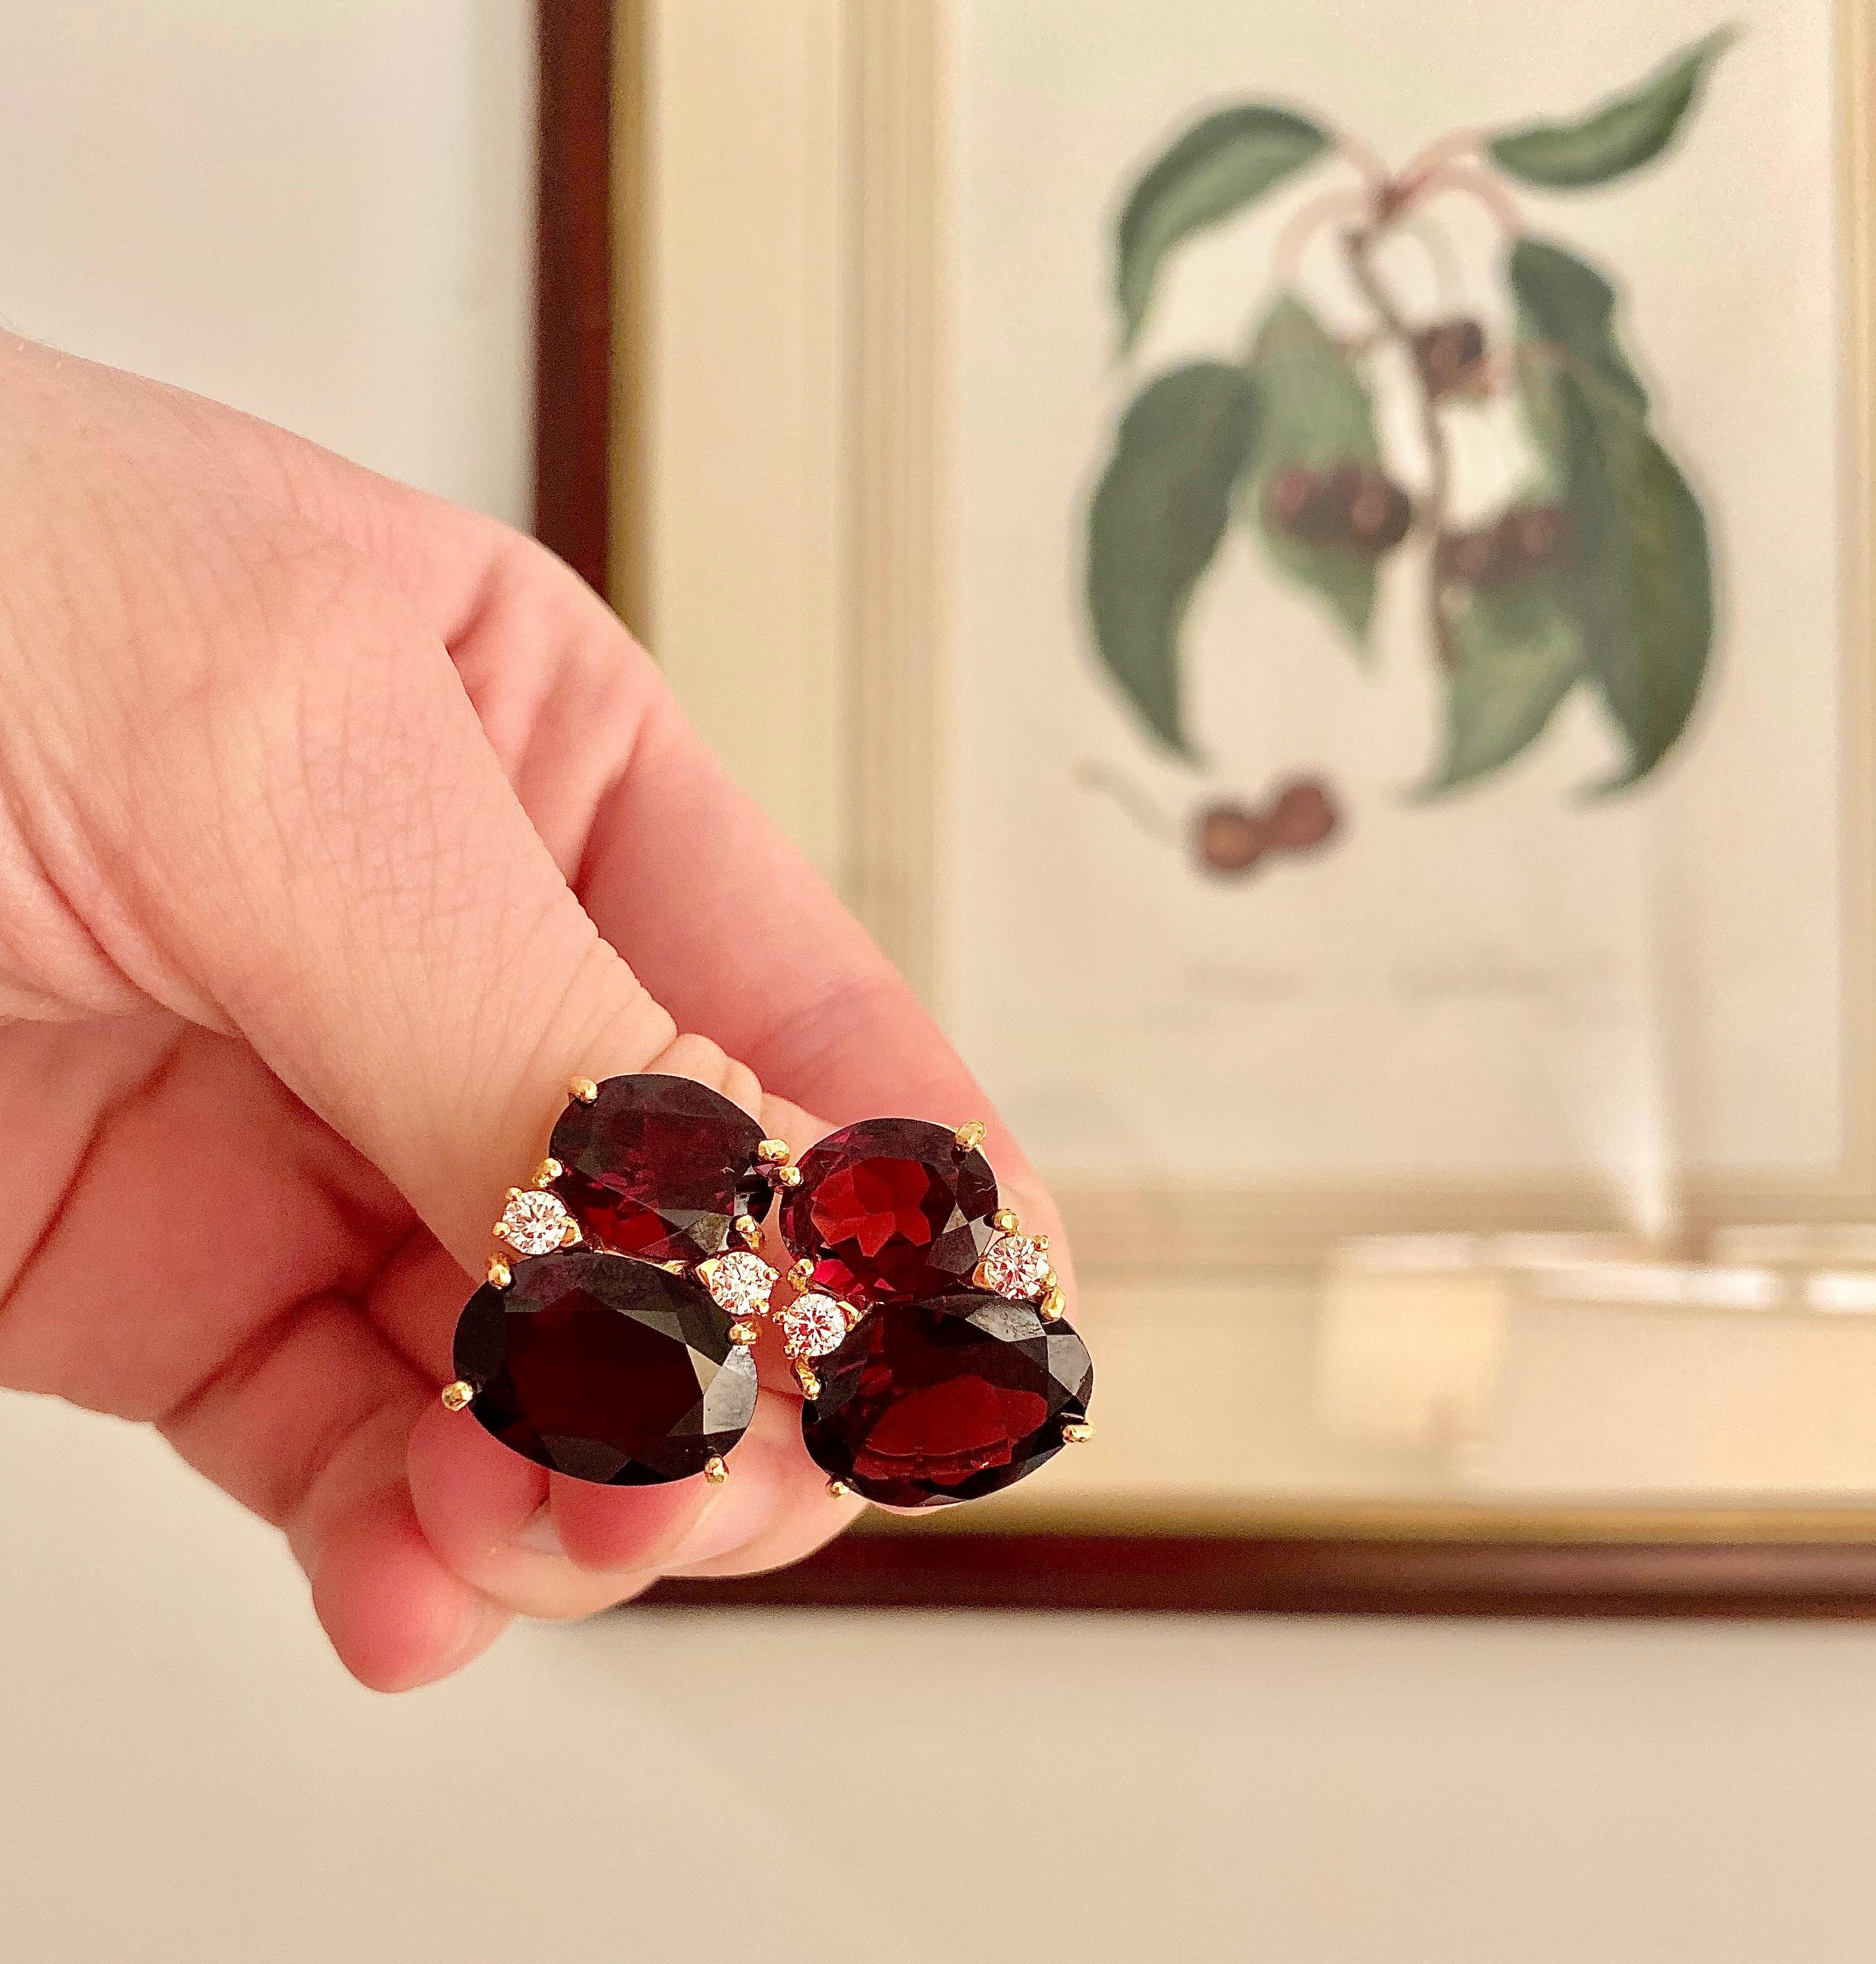 18kt Yellow Gold Large GUM DROP™ Clip Earrings with faceted Garnet and diamonds.

The Citrine is approximately 5 cts each and the Cabochon Citrine is approximately 12 cts each, and 4 diamonds weighing approximately 0.60cts

The earrings measure 1